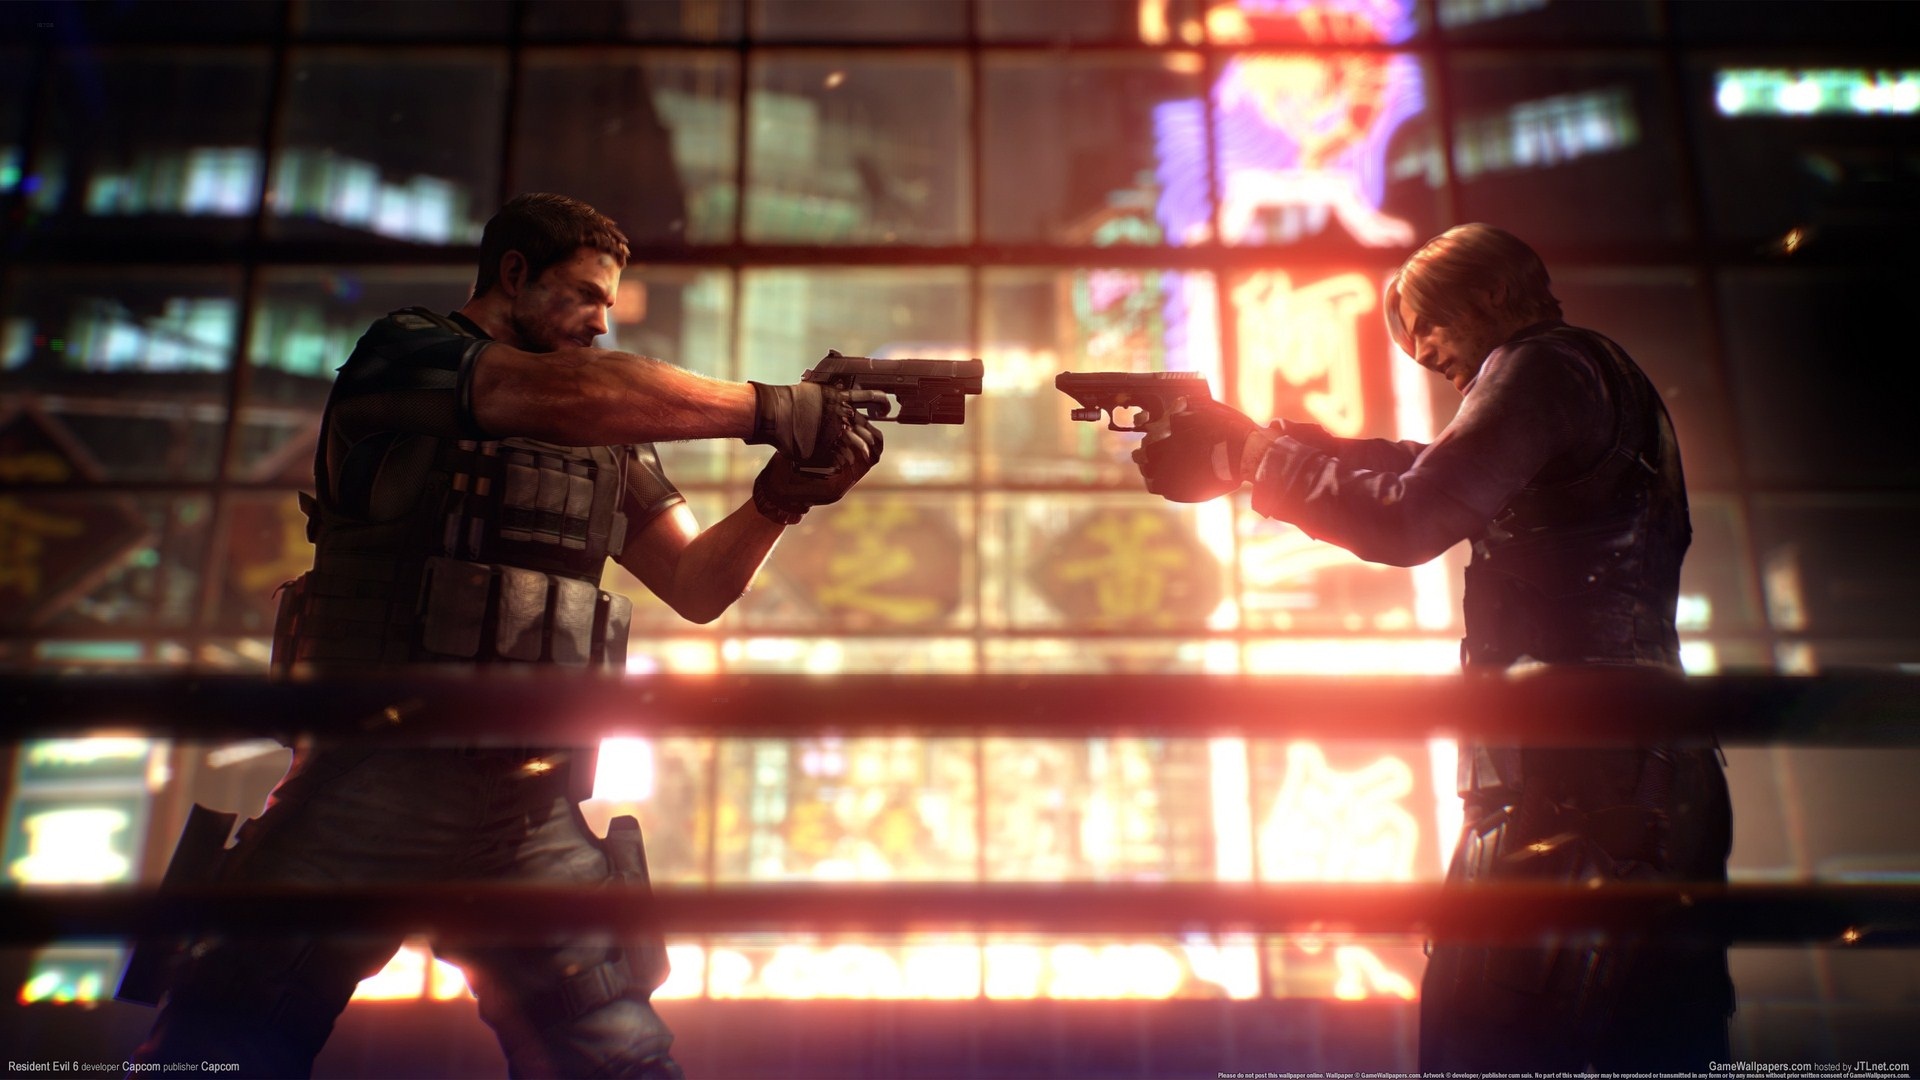 Resident Evil 6 HD game wallpapers #16 - 1920x1080